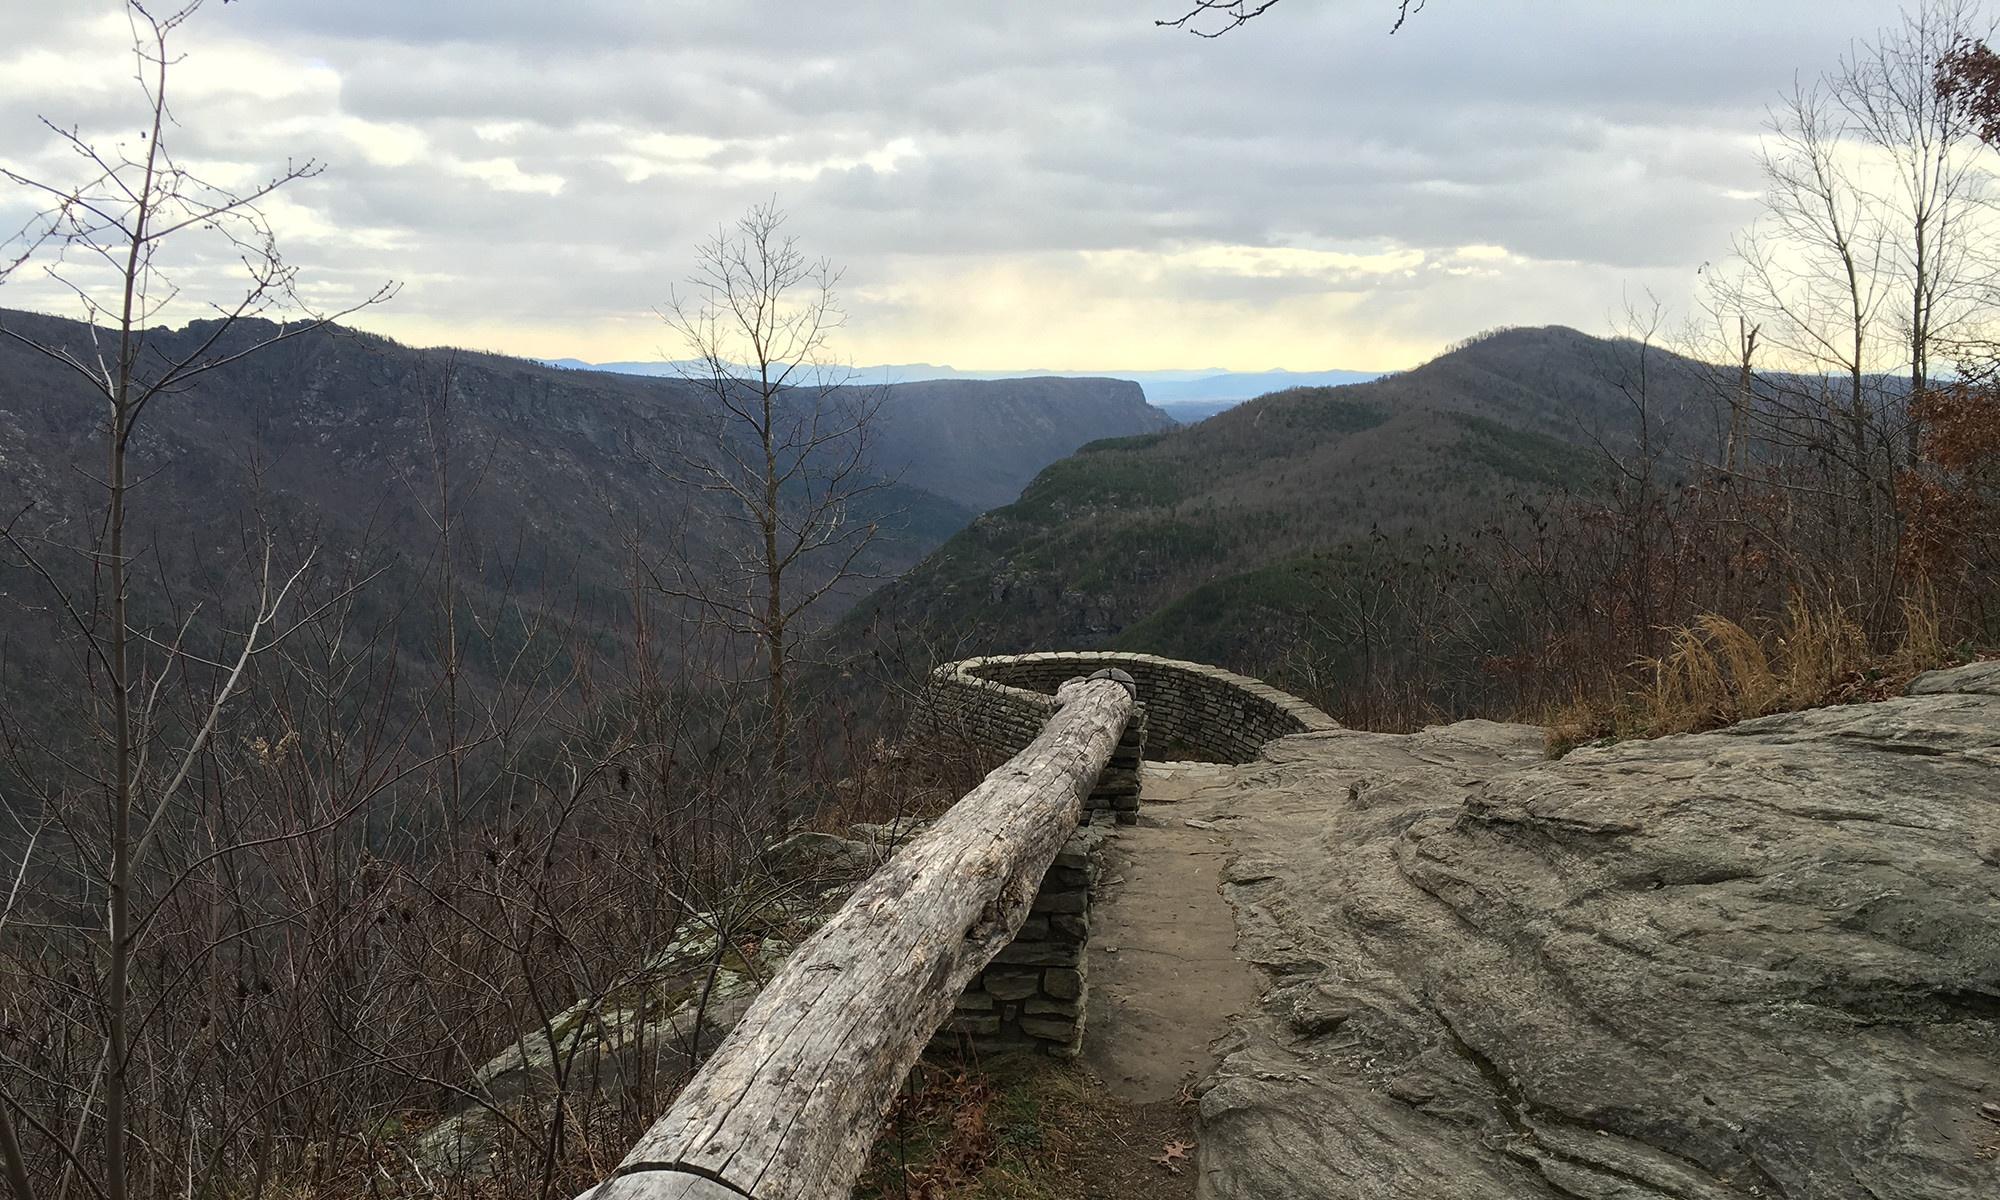 A photo of a tree log divider running along the edge of a mountain range. More mountains can be seen in the distance.